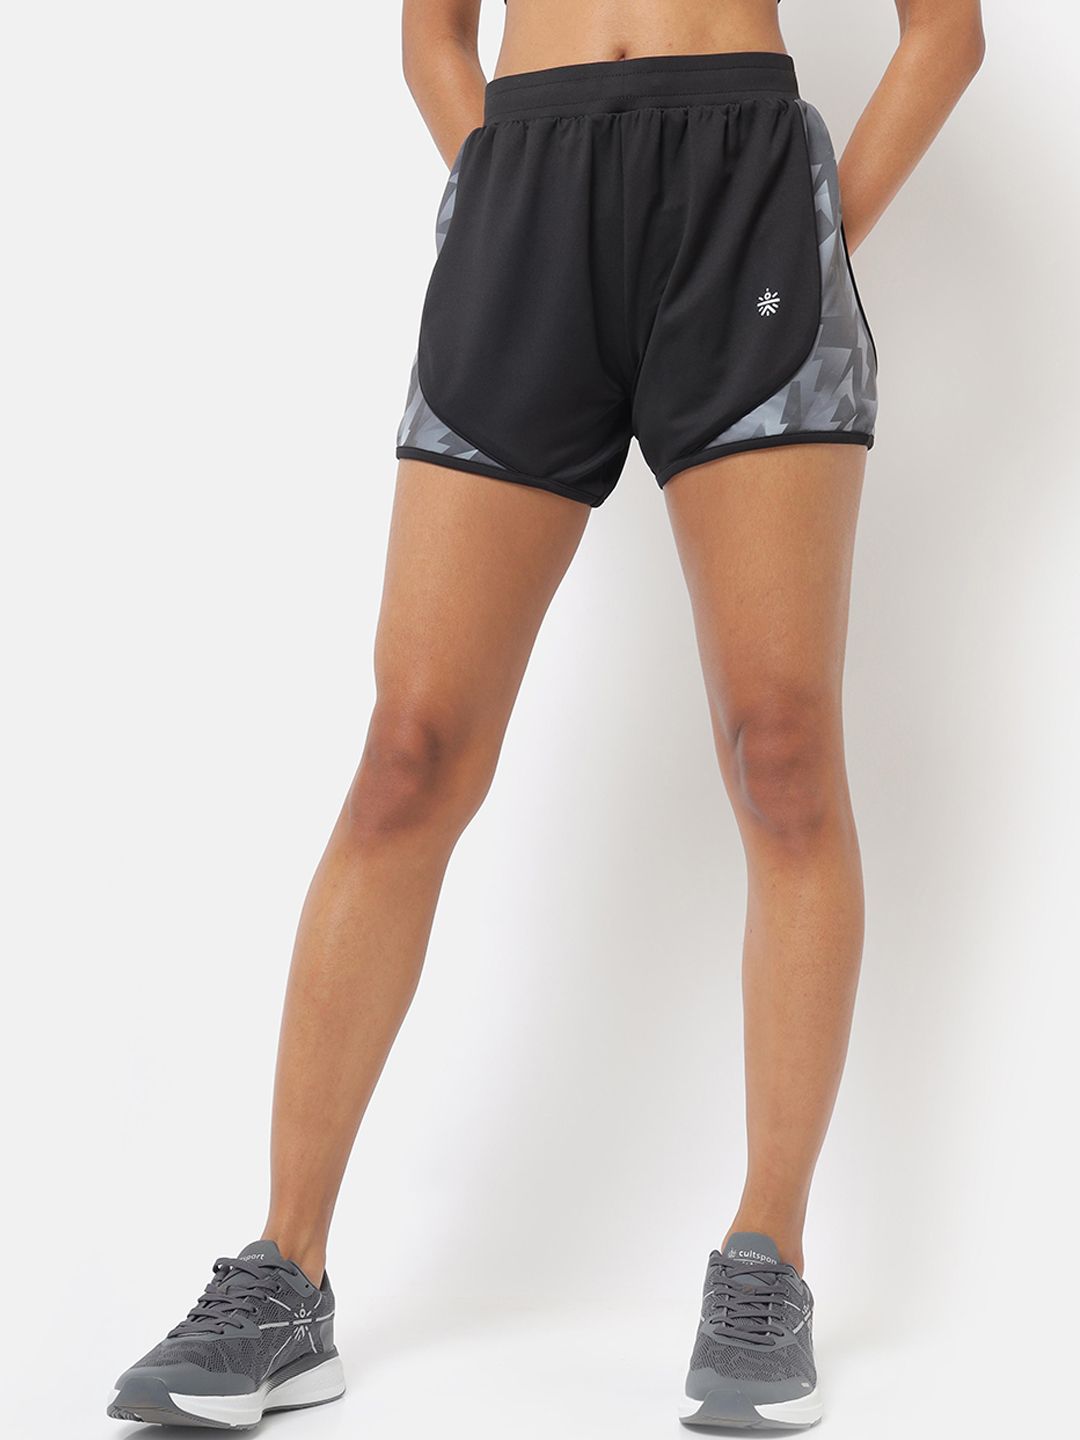 Cultsport Women Charcoal Grey Training or Gym Sports Shorts Price in India